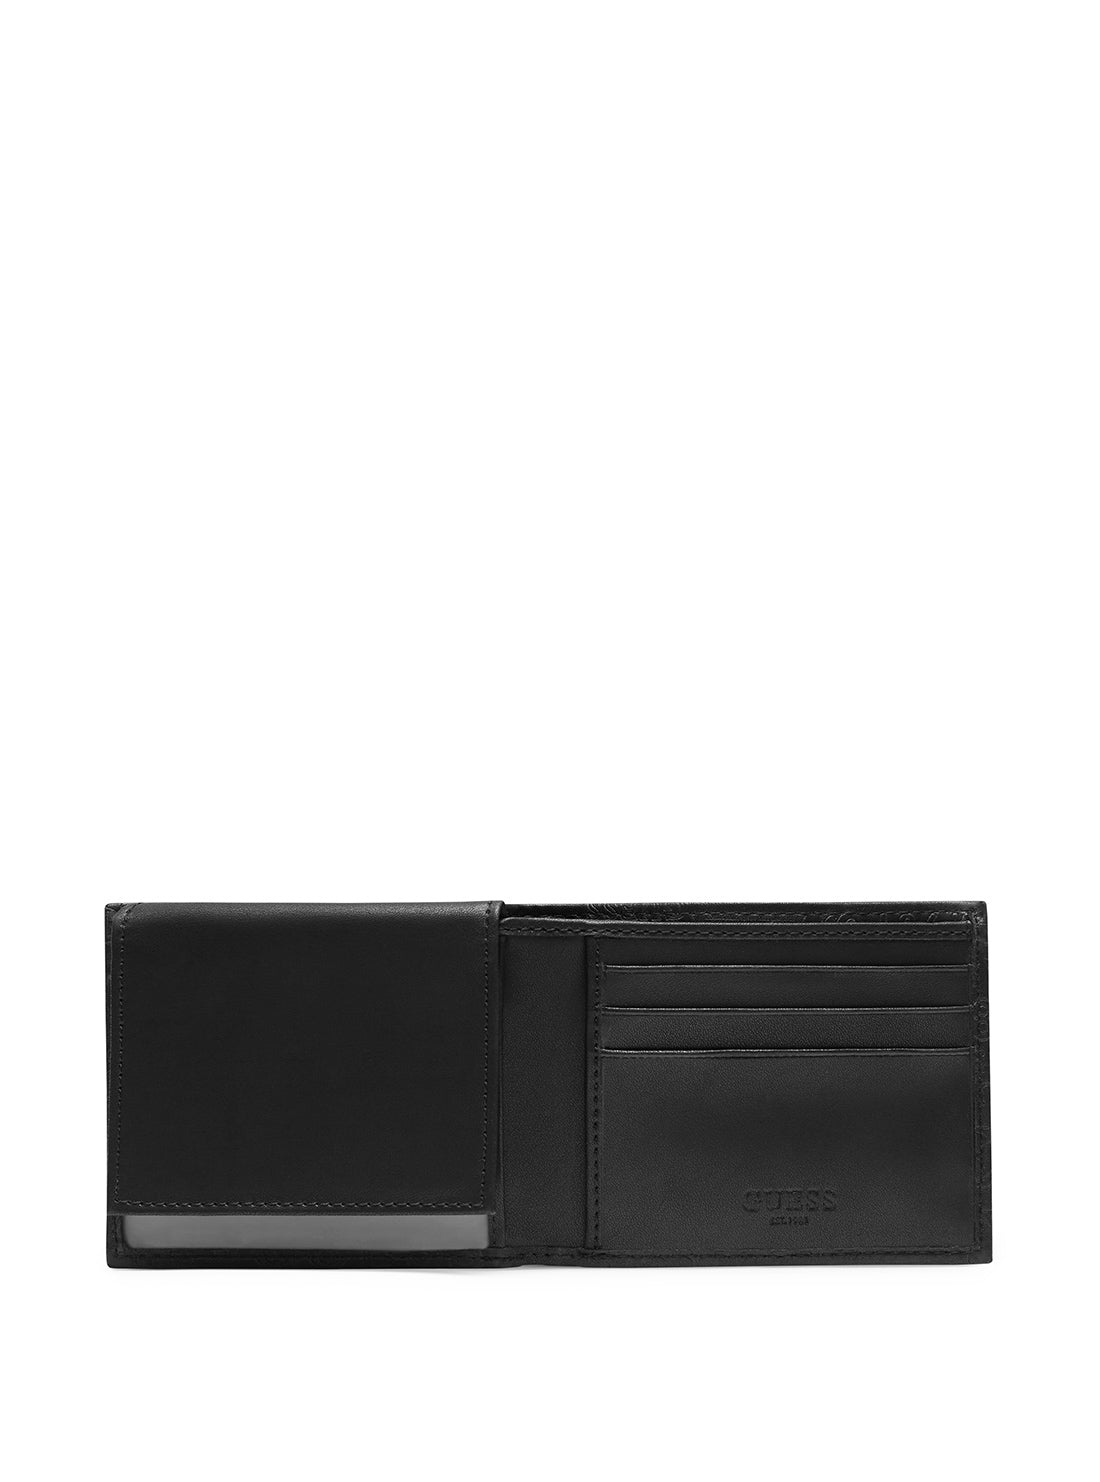 GUESS Black Logo Coso All Over Embossed Wallet inside view